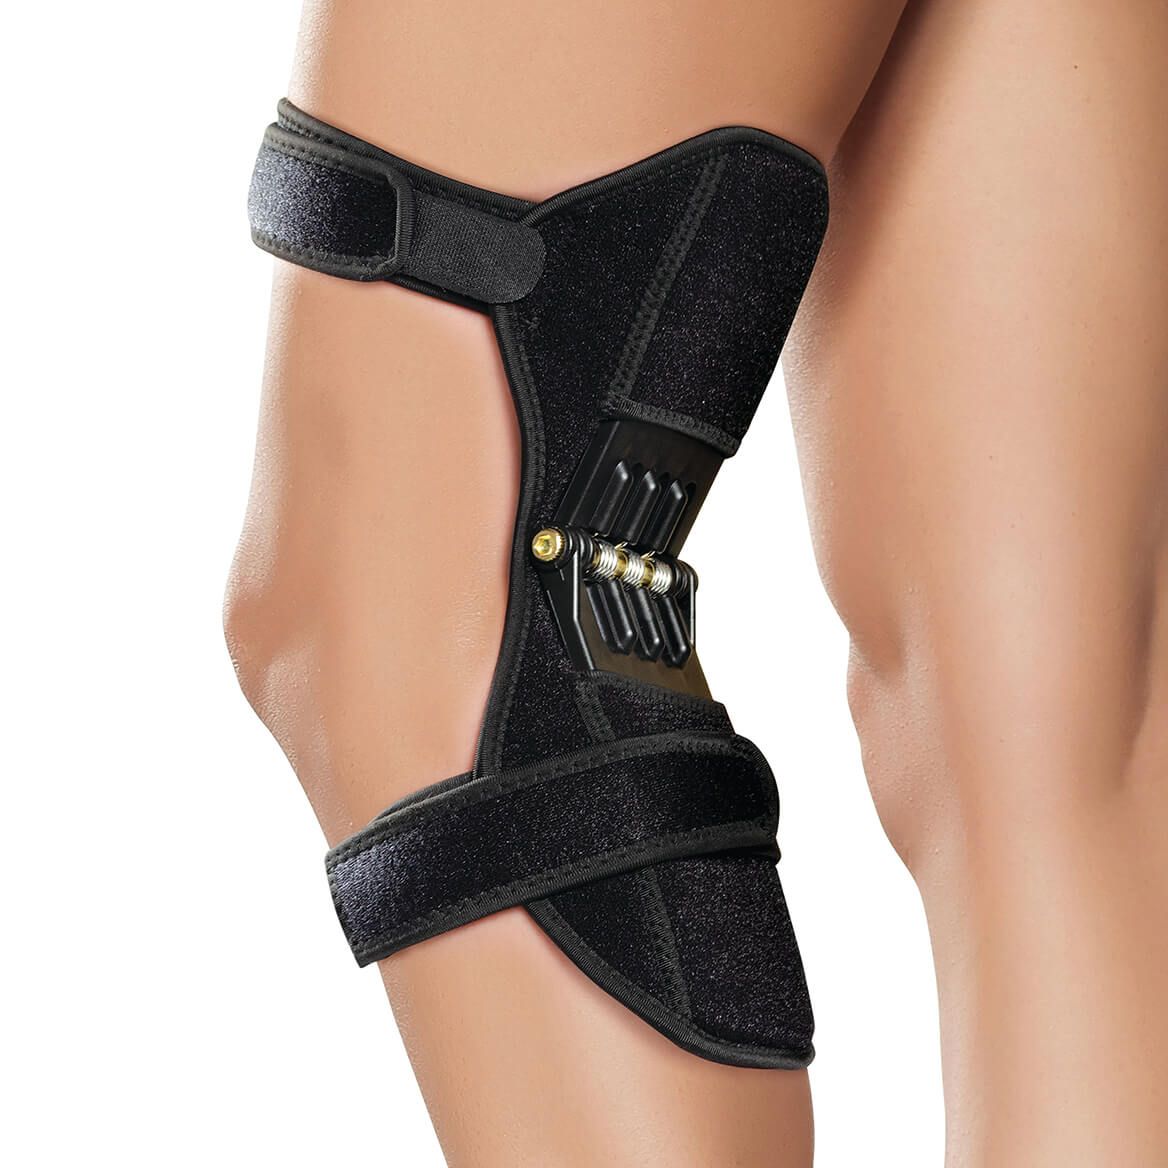 Spring-Powered Knee Support + '-' + 370766